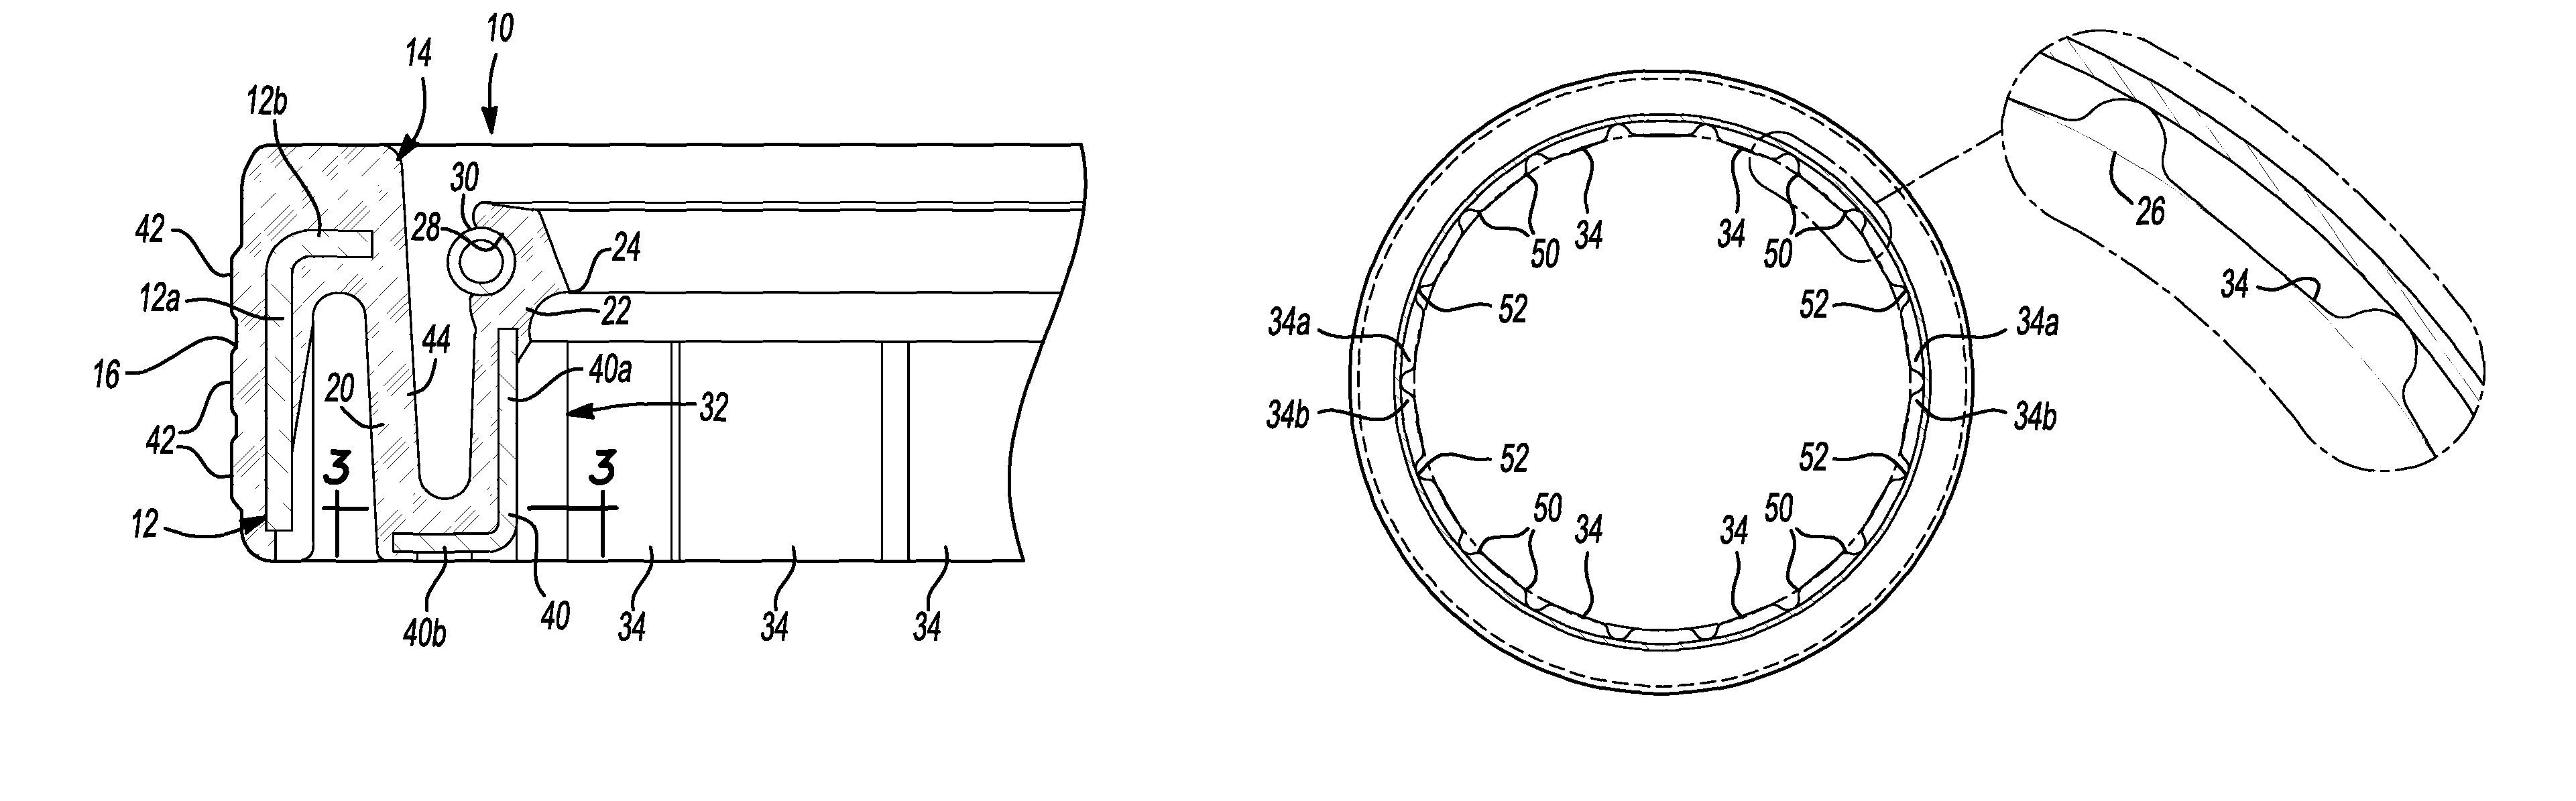 Radial shaft seal with large radial offset accommodation